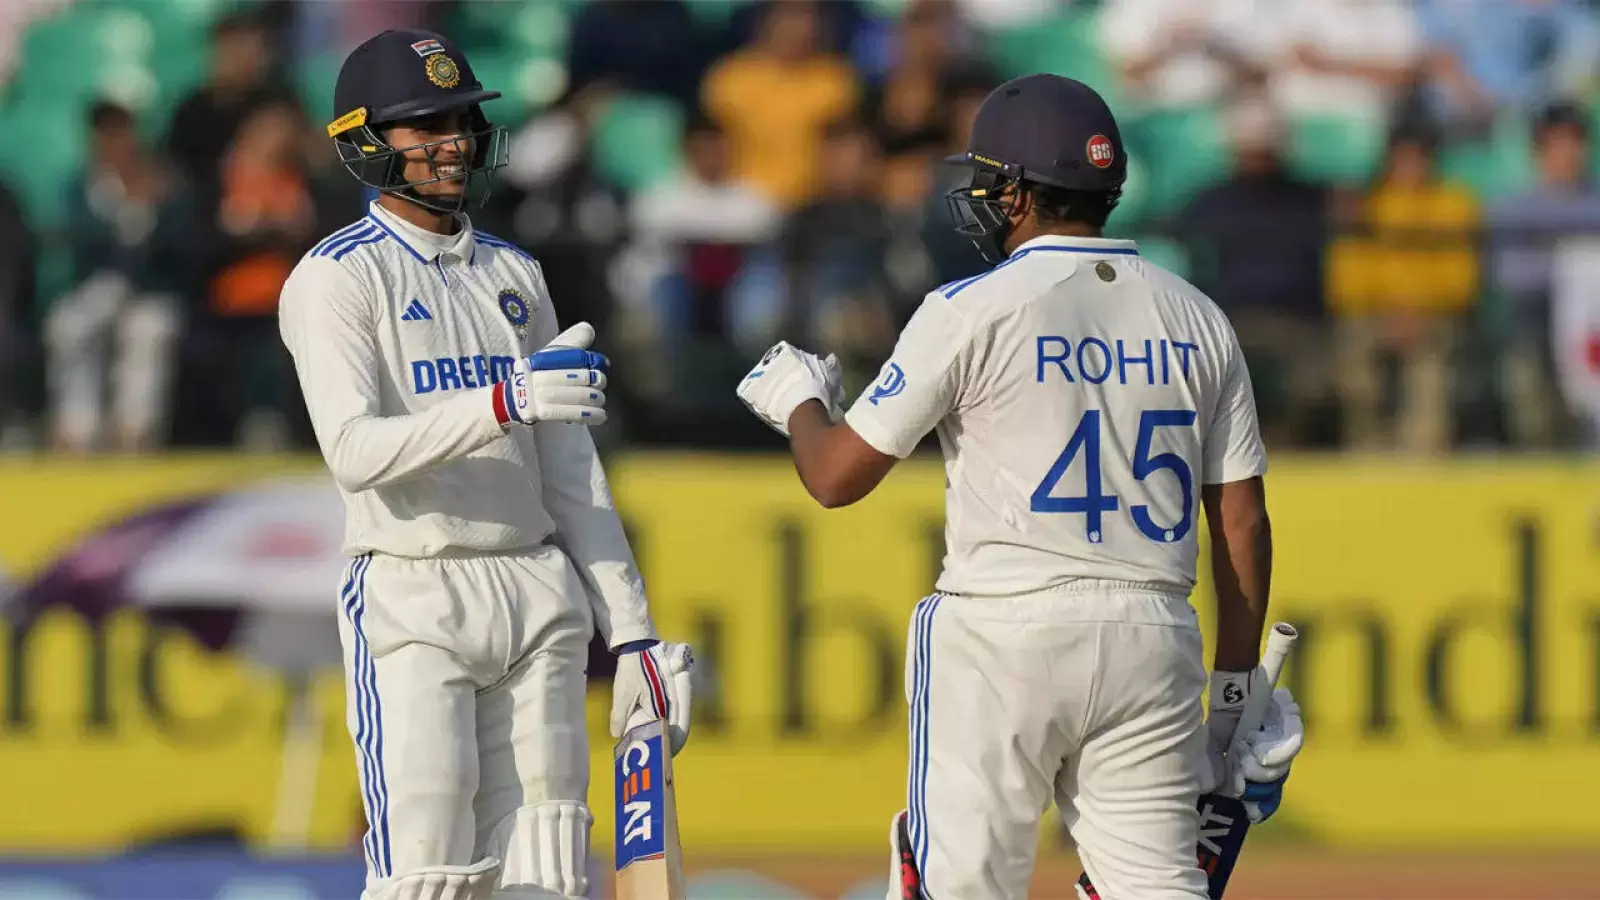 IND vs ENG: Rohit Sharma and Shubman Gill's century, India 264/1 till lunch on the second day, lead by 46 runs over England